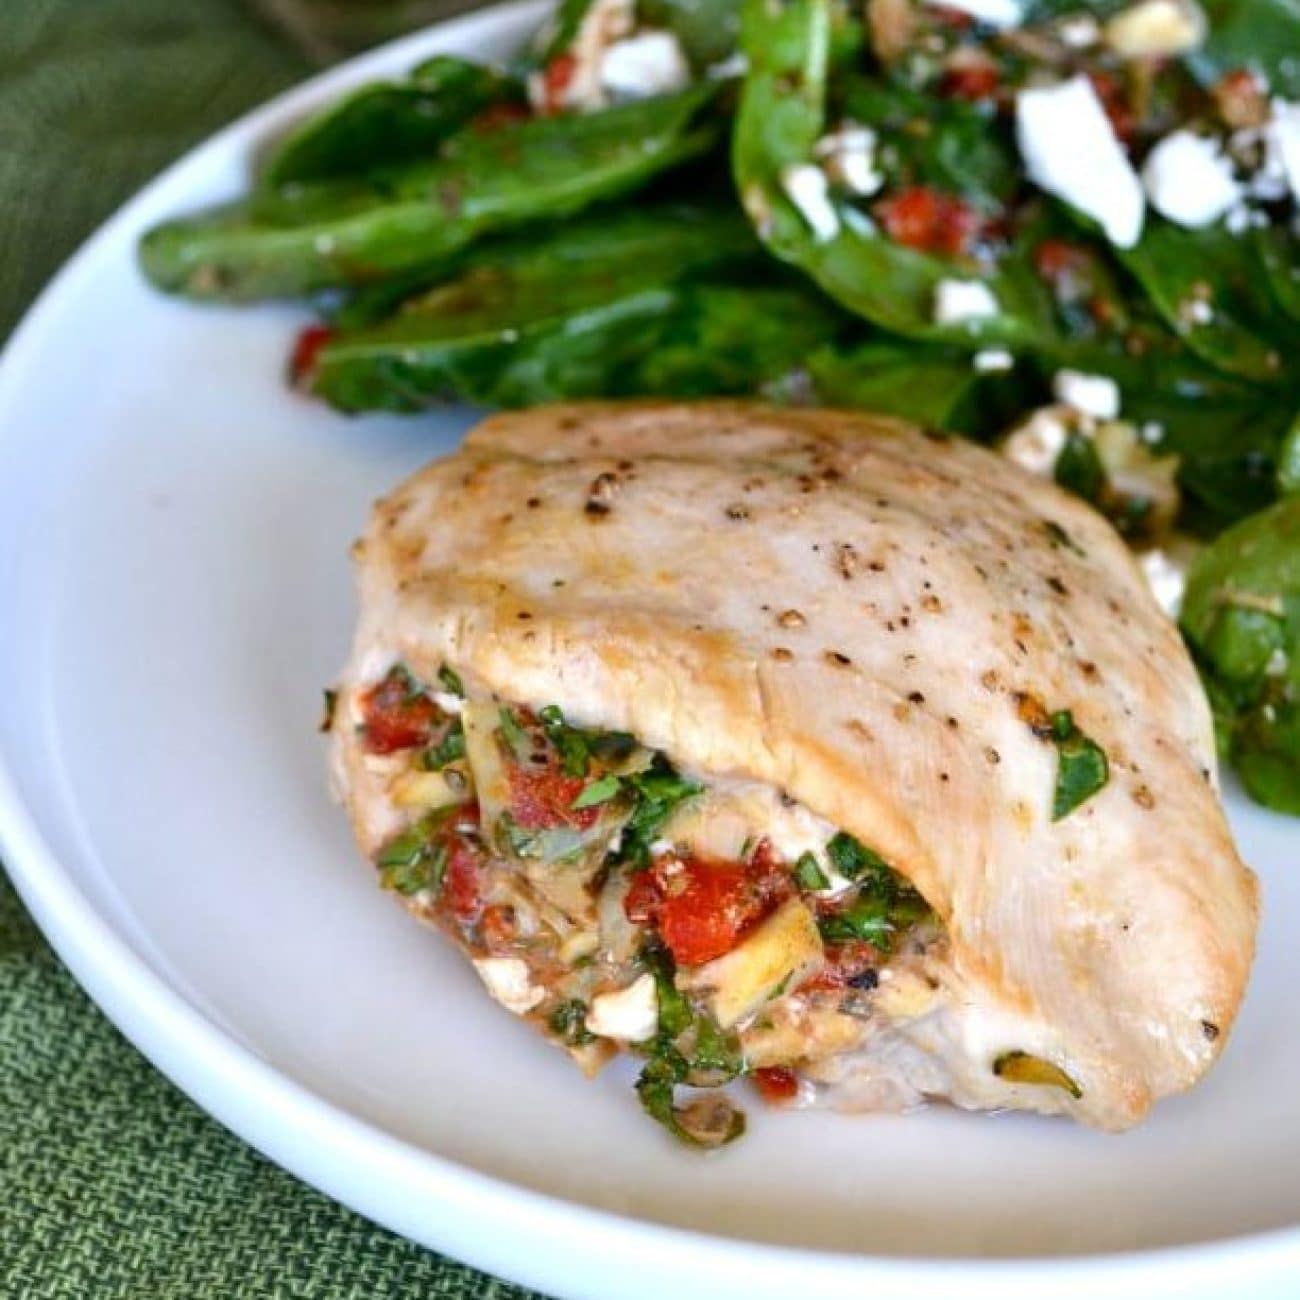 Cheddar-Stuffed Chicken Breast with Spinach – A Flavorful Delight